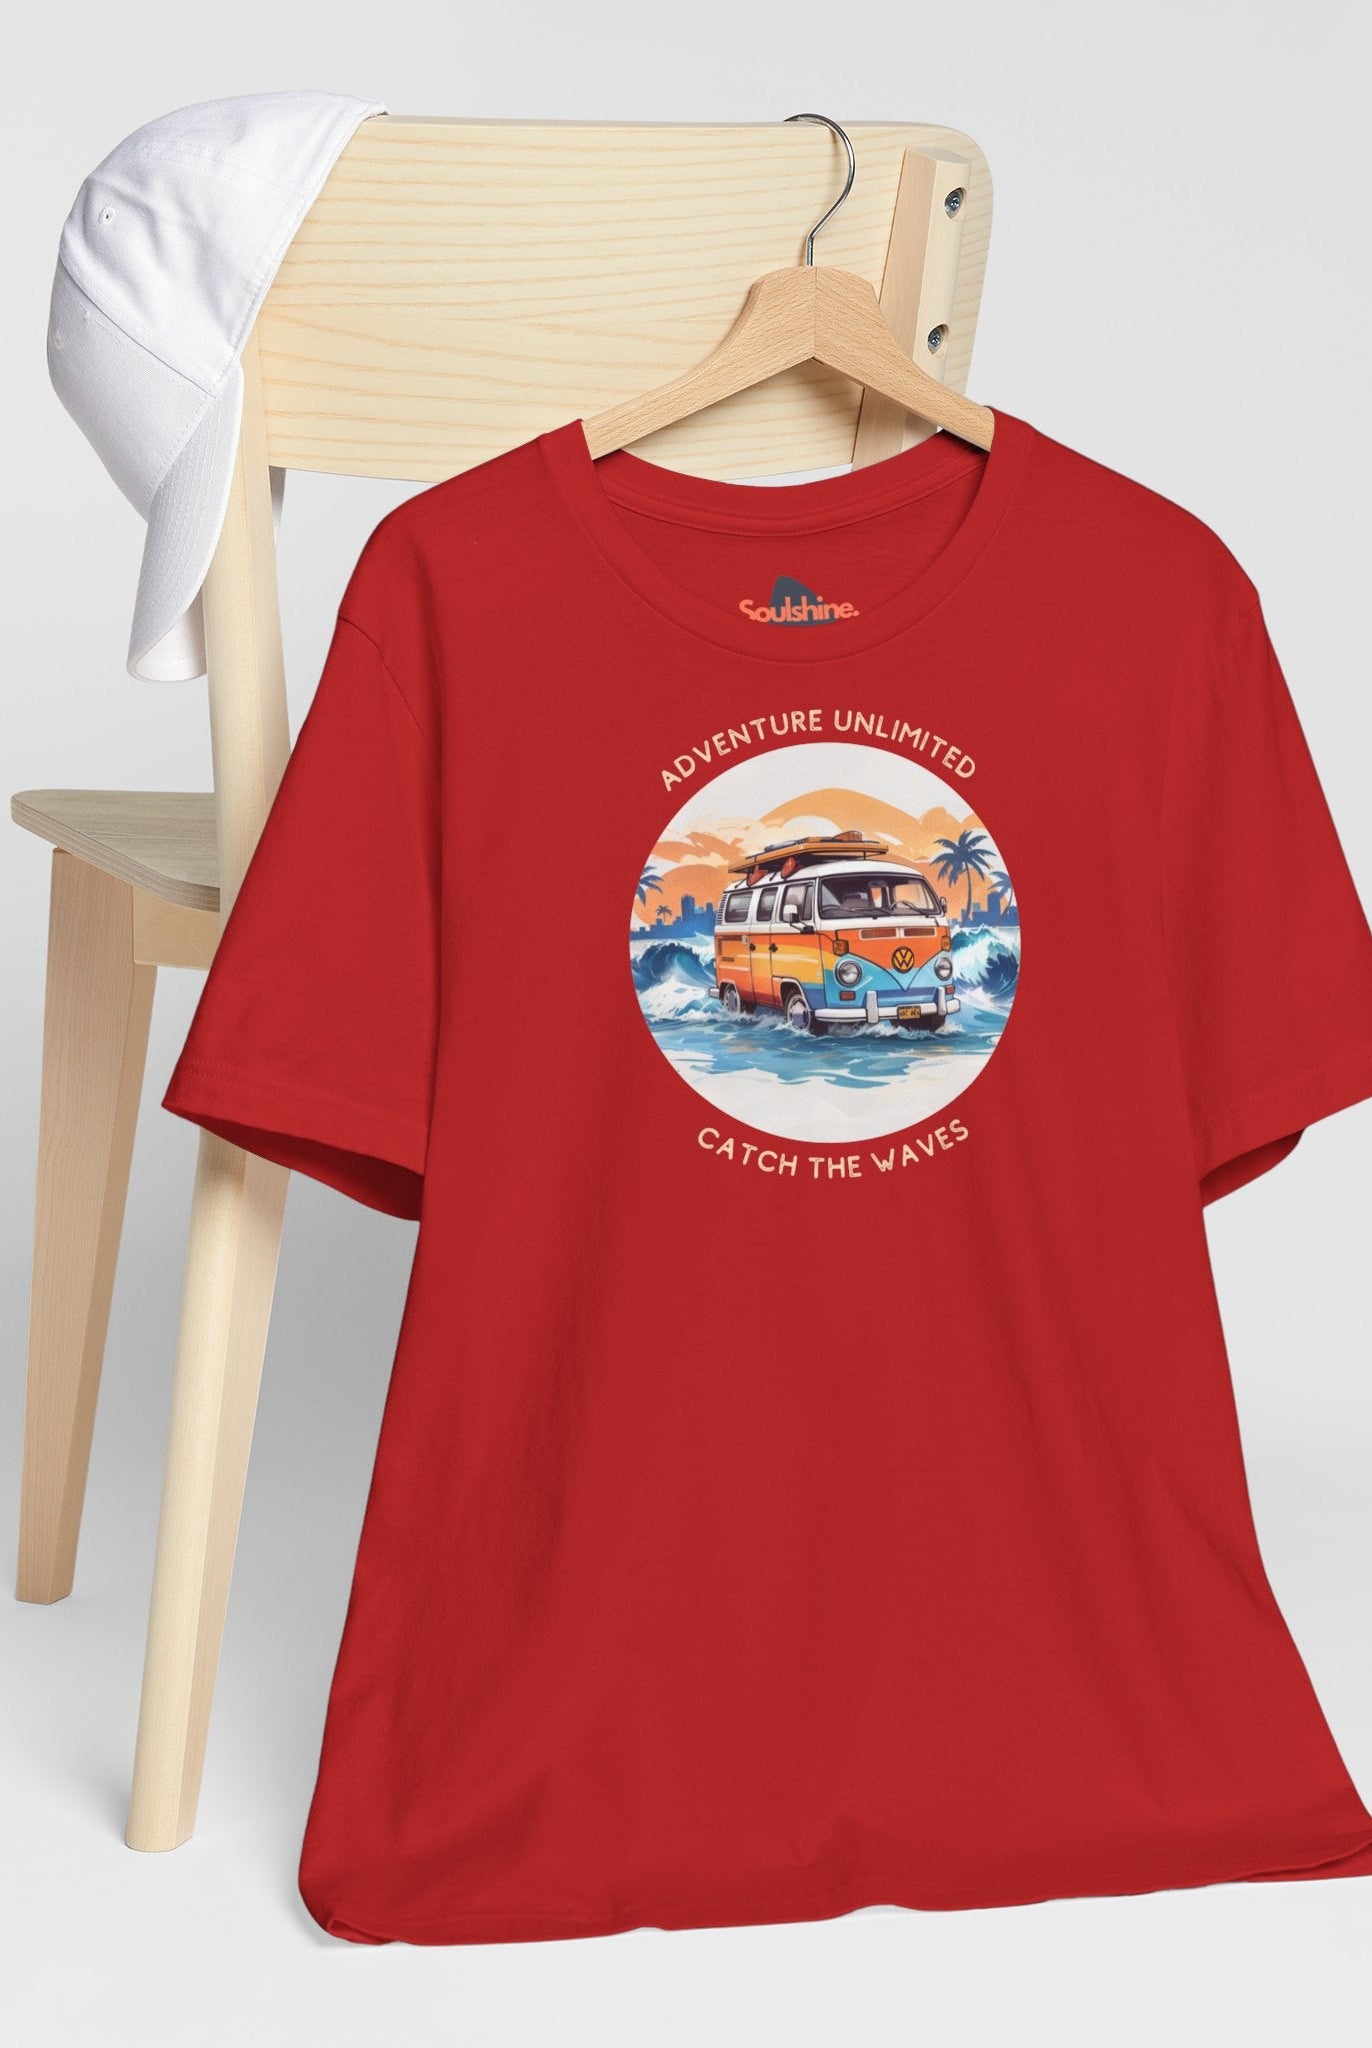 Adventure Unlimited Surfing T-Shirt with Van and Surfboard Print - Bella & Canvas EU - Direct-to-Garment Printed Item